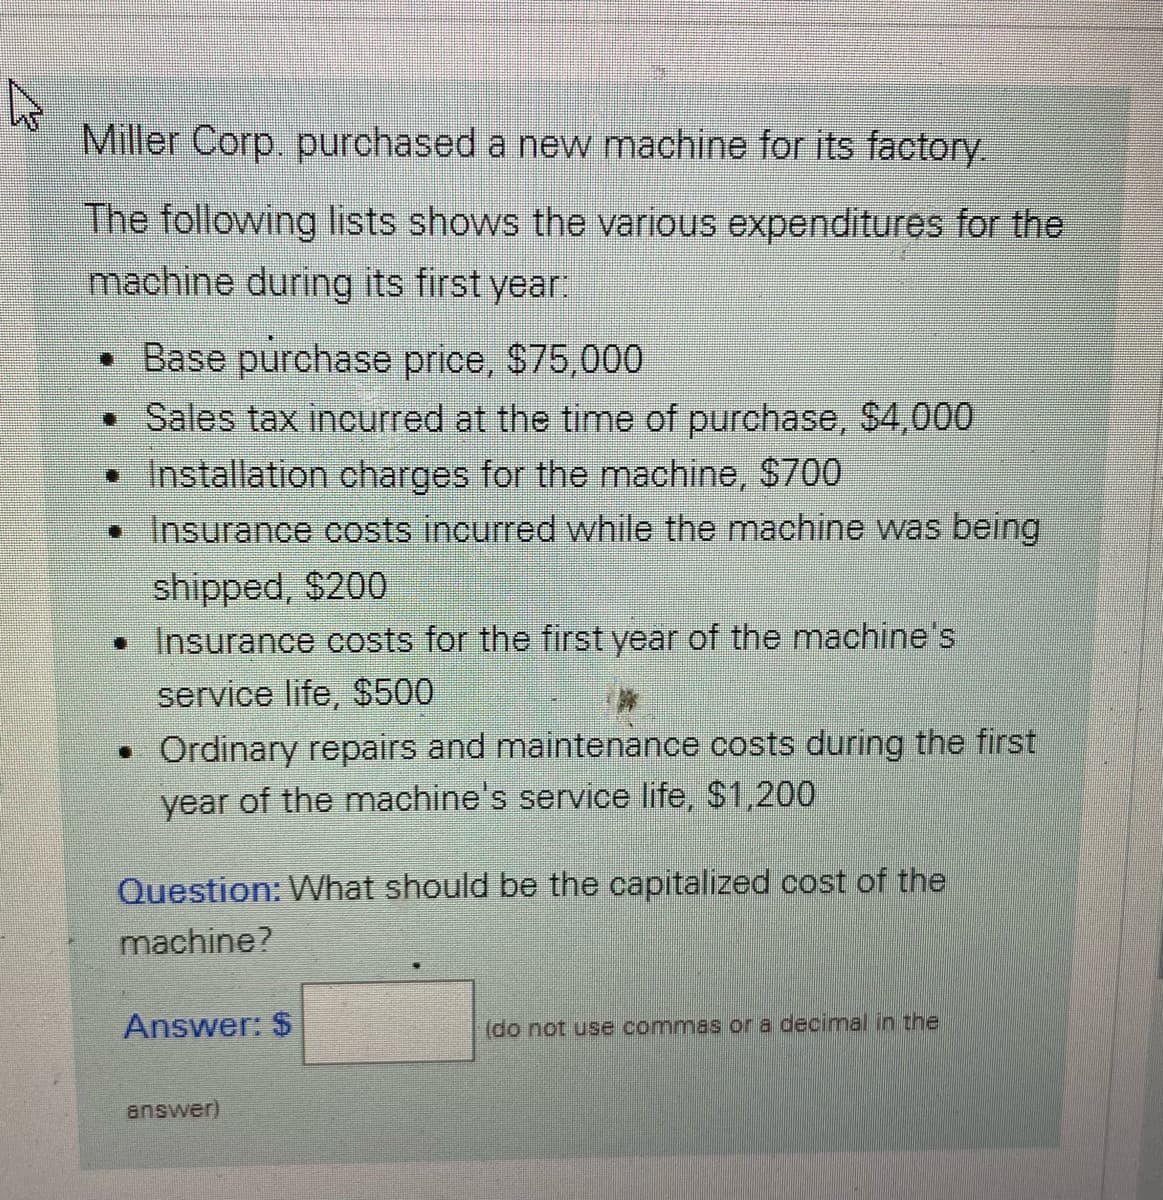 Miller Corp. purchased a new machine for its factory.
The following lists shows the various expenditures for the
machine during its first year:
• Base purchase price, $75.000
• Sales tax incurred at the time of purchase, $4,000
• Installation charges for the machine, $700
• Insurance costs incurred while the machine was being
shipped, $200
• Insurance costs for the first year of the machine's
service life, $500
• Ordinary repairs and maintenance costs during the first
year of the machine's service life, $1,200
Question: What should be the capitalized cost of the
machine?
Answer: $
(do not use commas or a decimal in the
answer)
